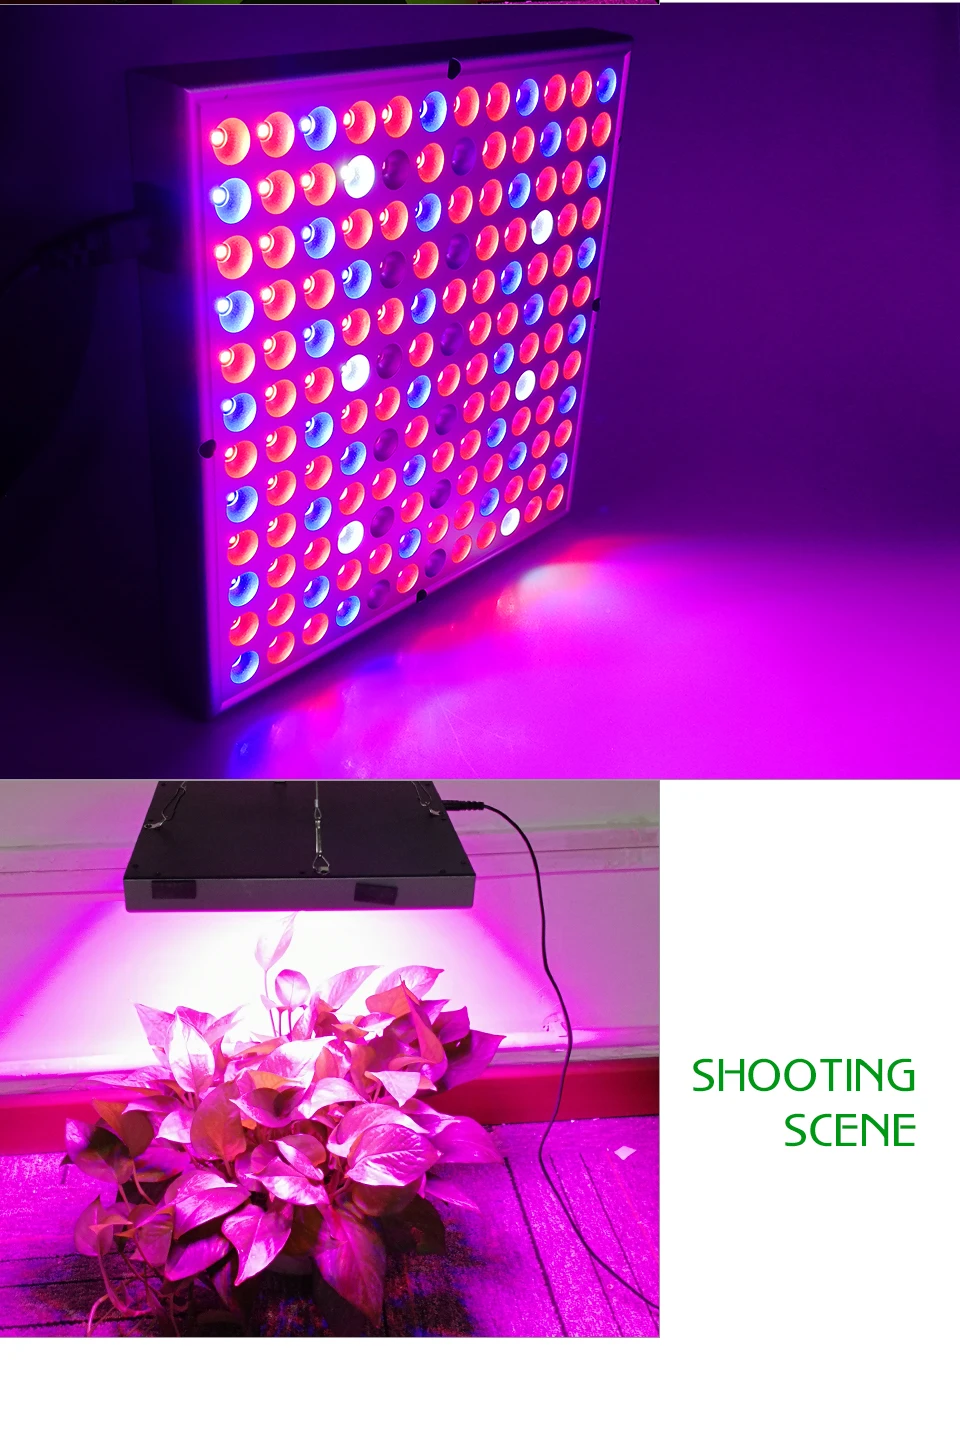 Panel Led Grow Light Lamp 45W Red Blue IR UV Full Spectrum Fitolampy For Indoor Plants Flowers Greenhouse Hydroponic Grow Tent (10)